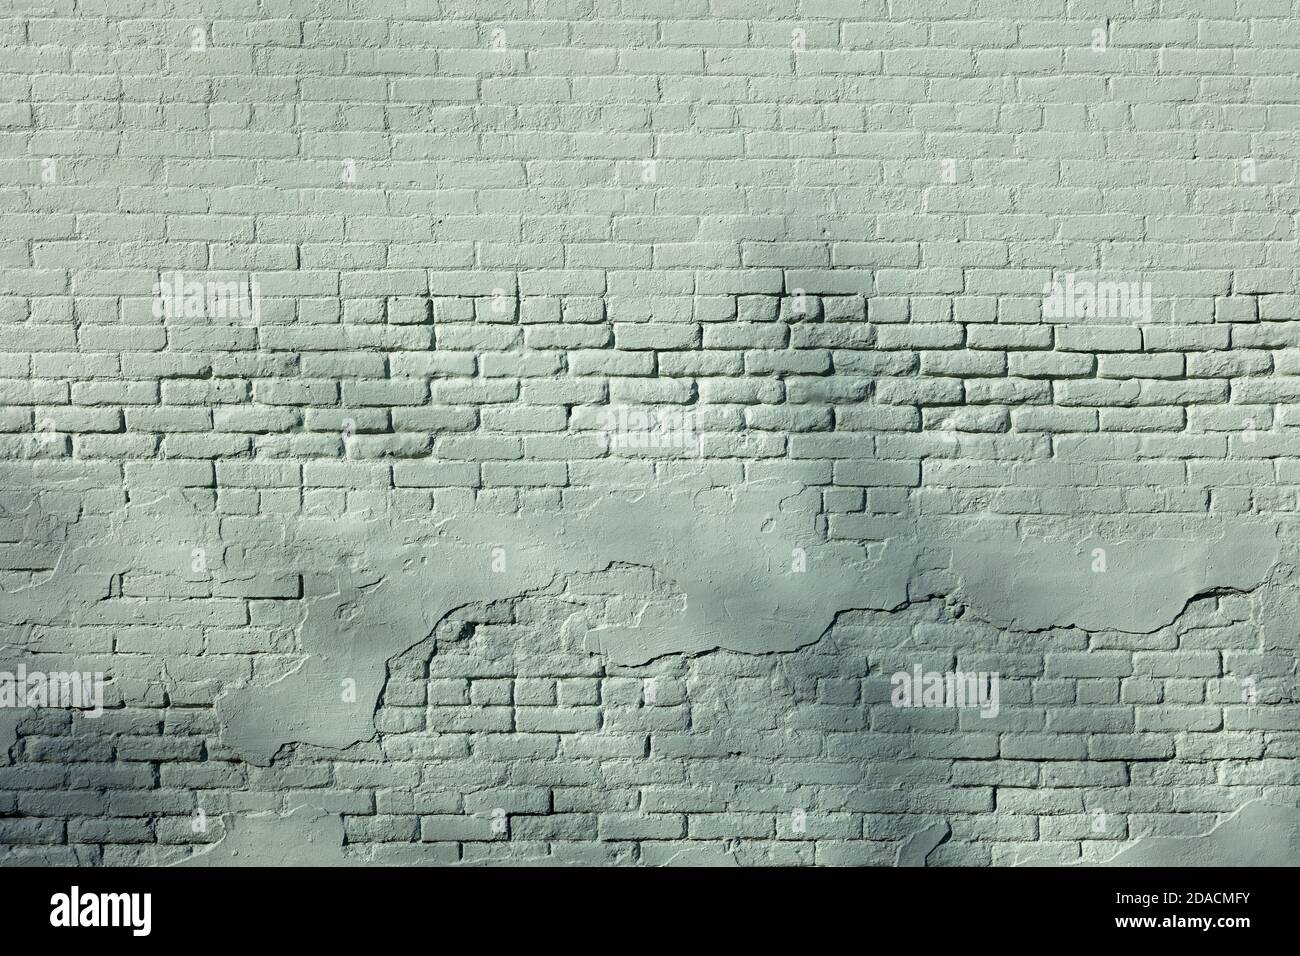 Brickwall, by James D Coppinger/Dembinsky Photo Assoc Stock Photo